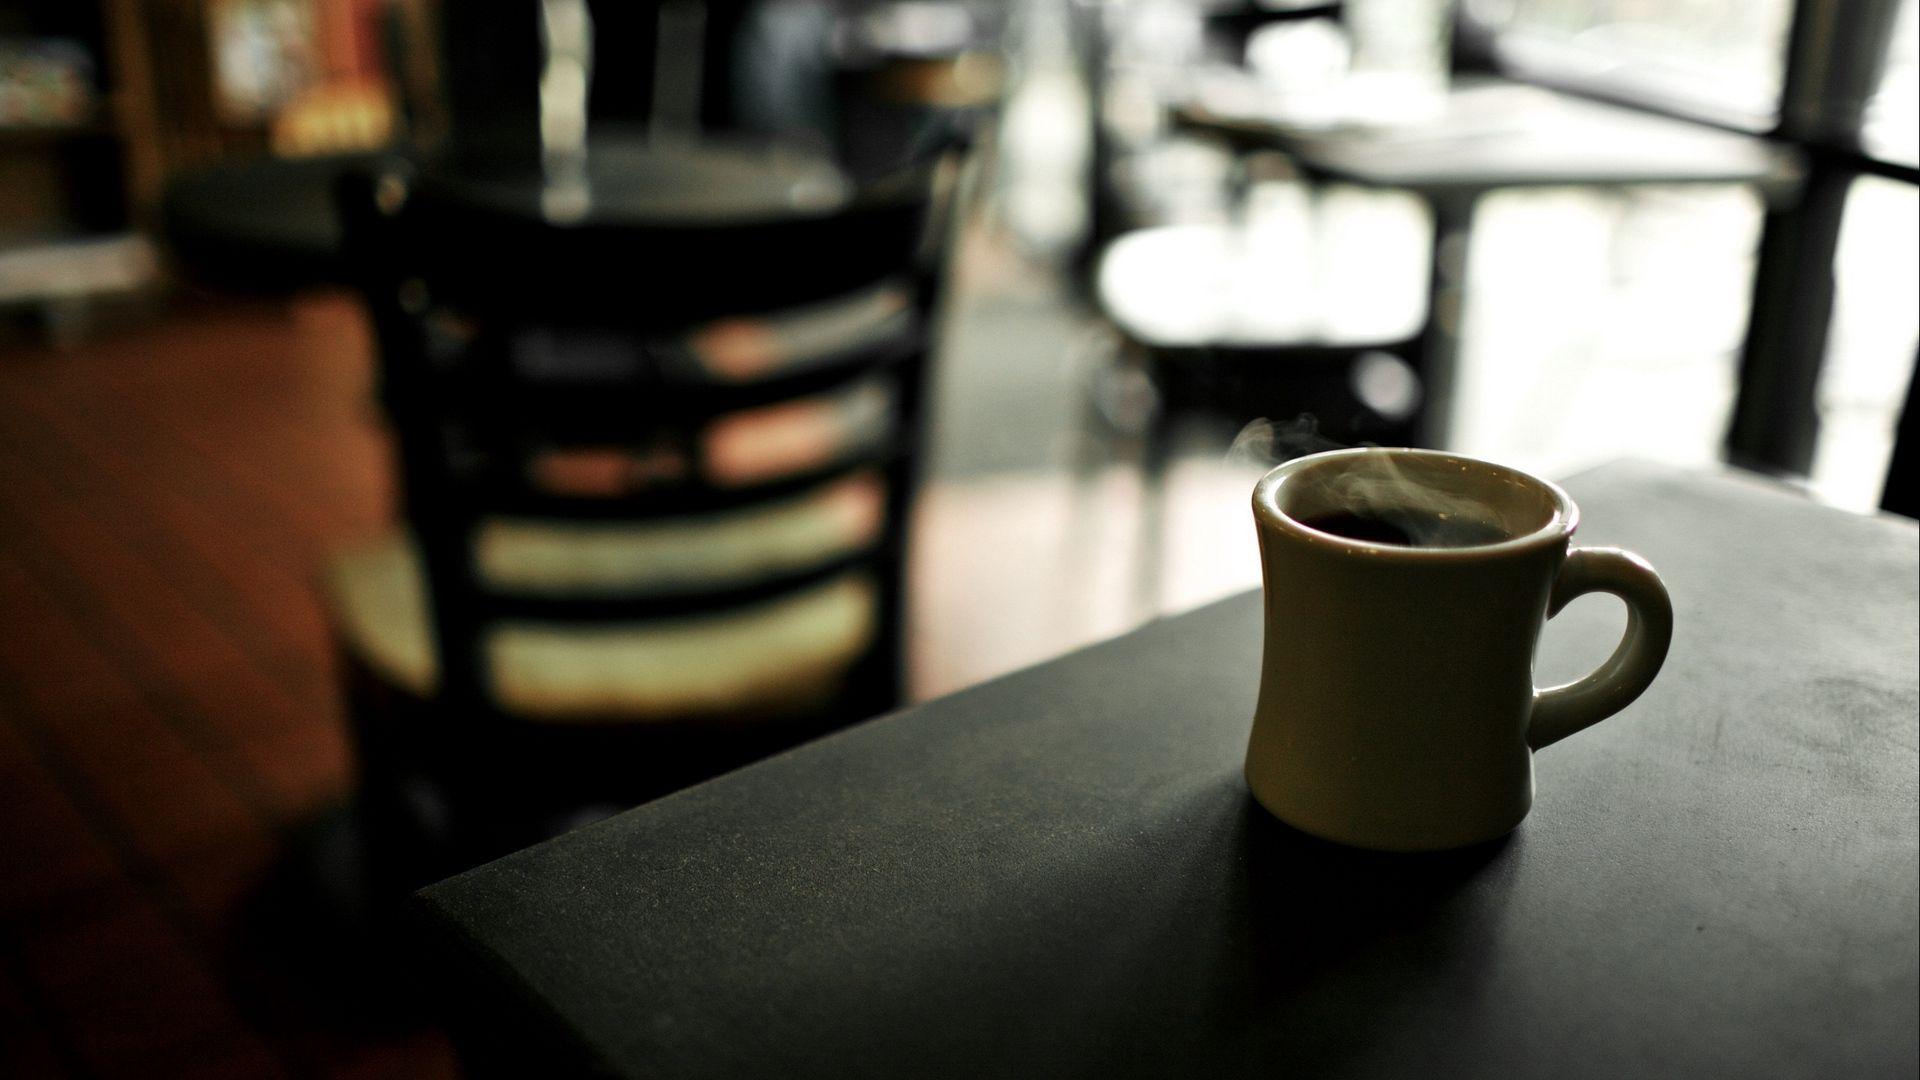 Download wallpaper 1920x1080 cafe, cup, coffee, hot, mood, table